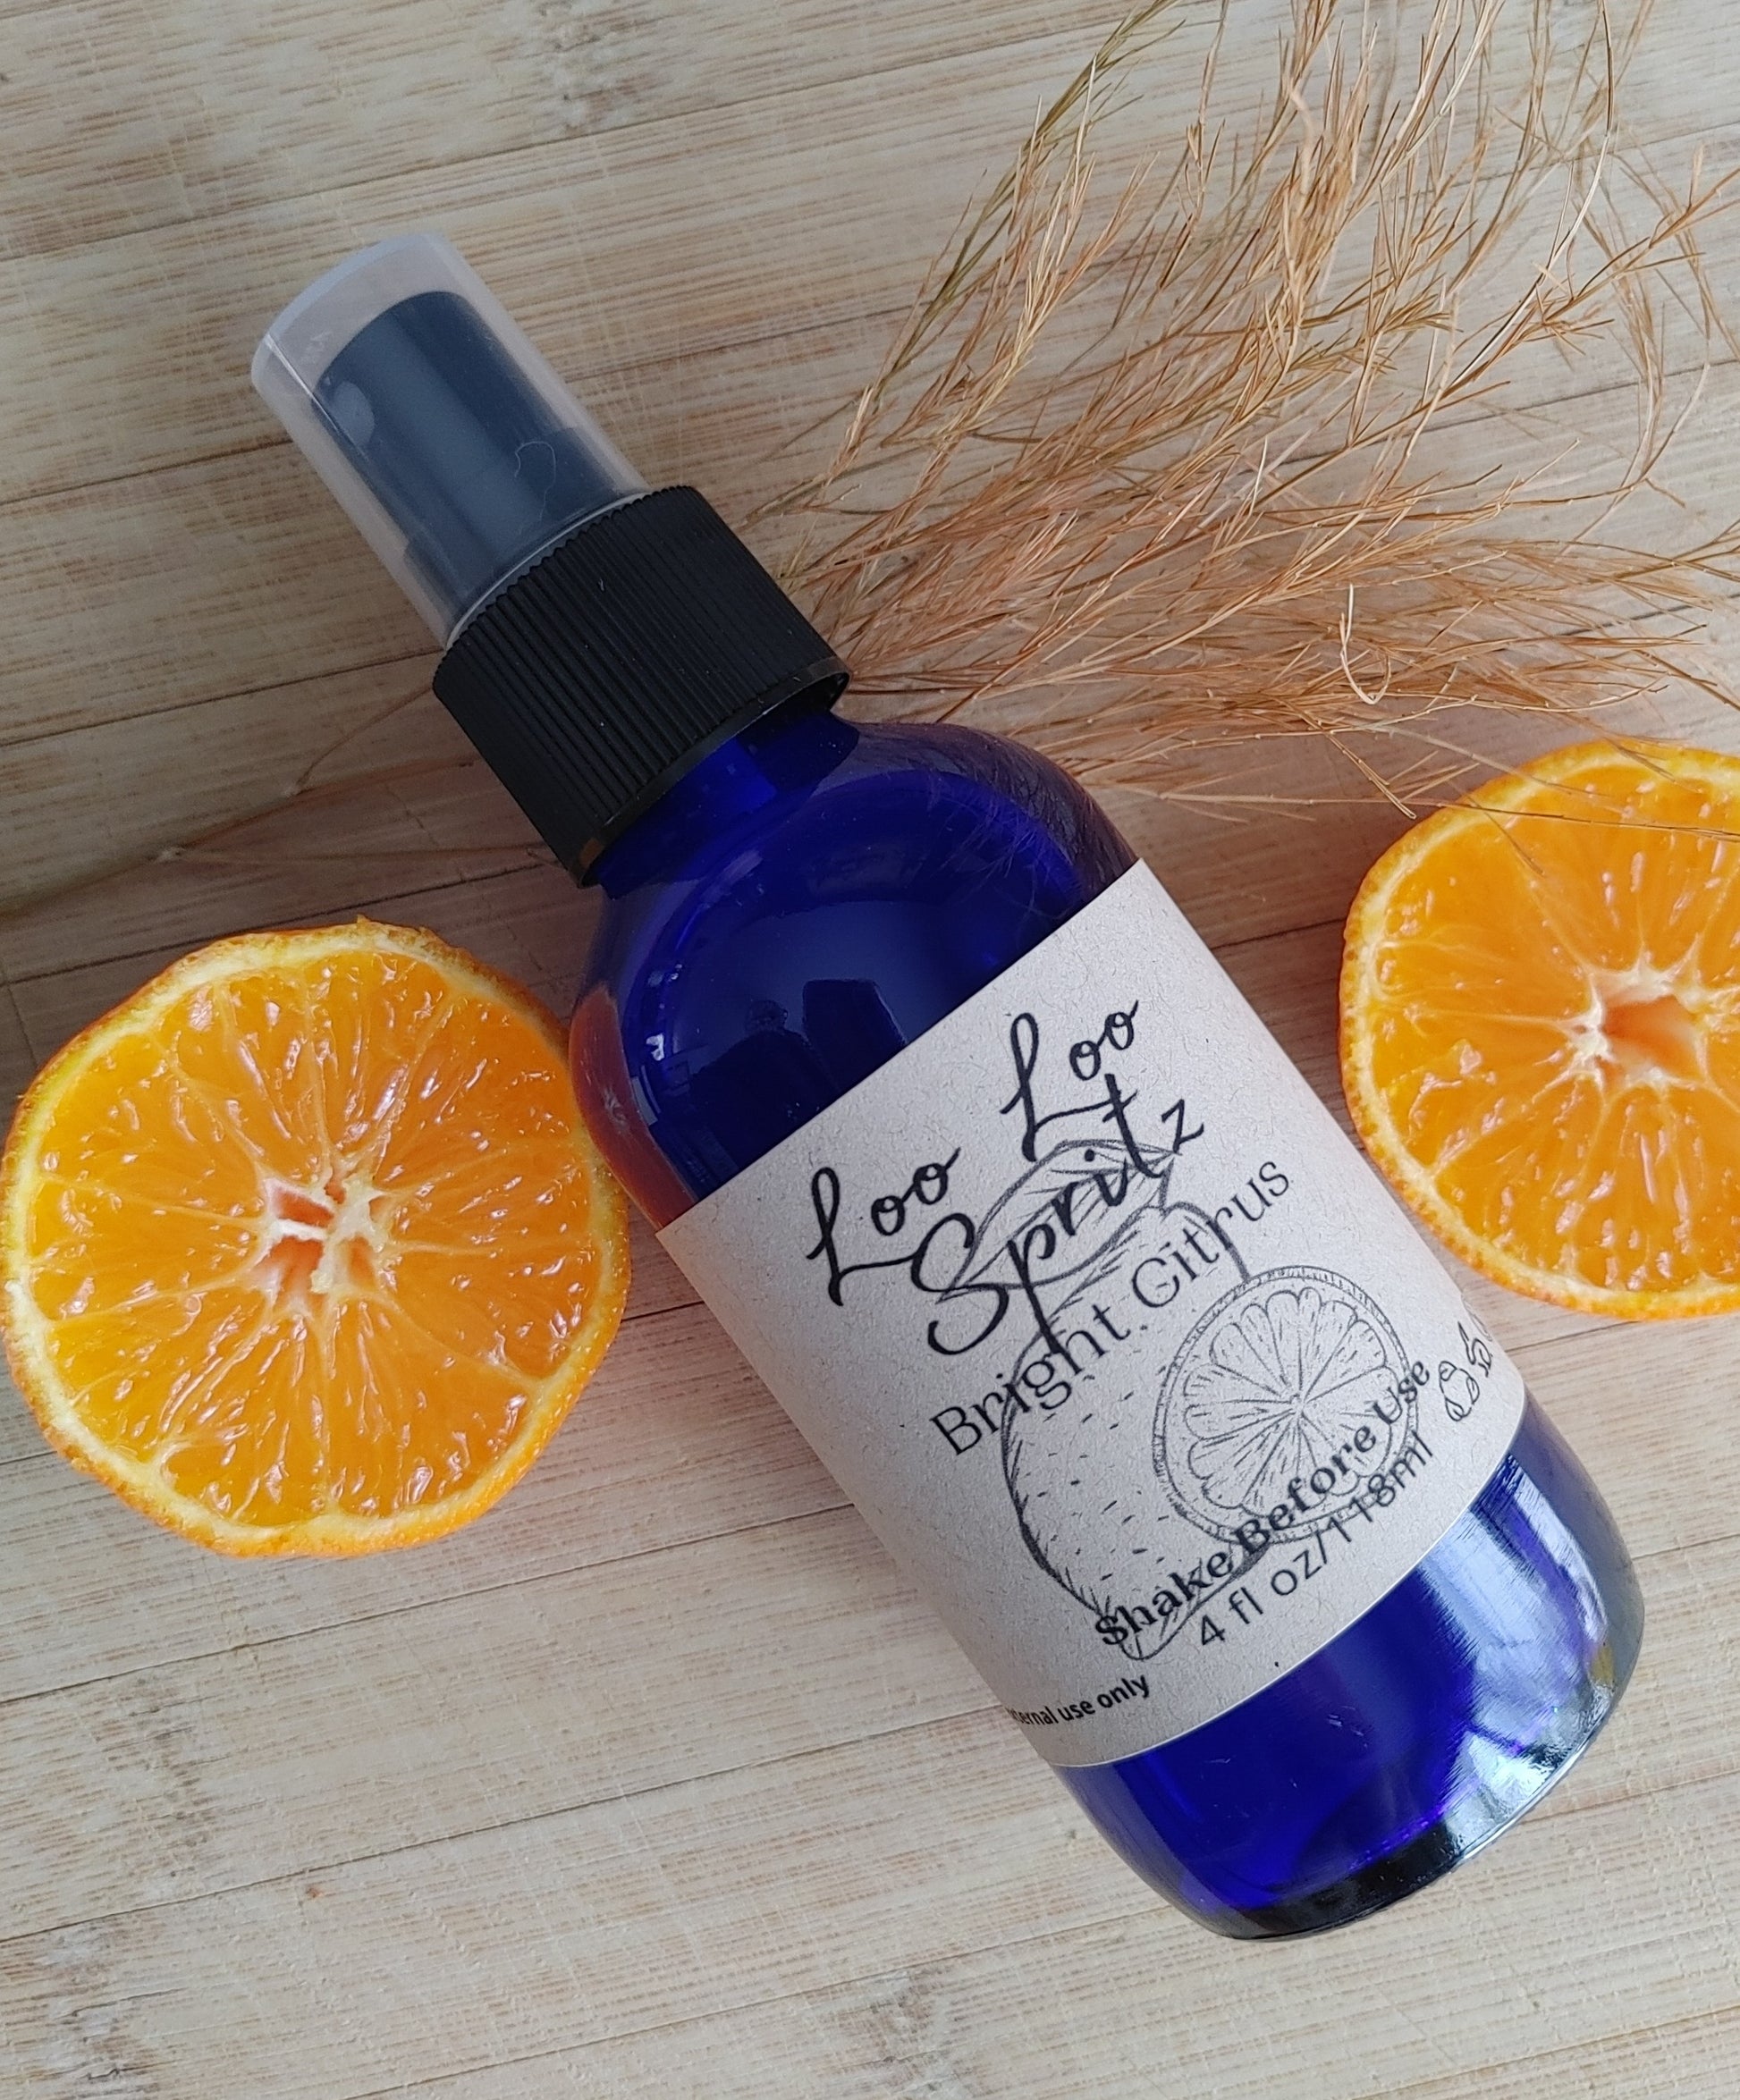 bright citrus all natural bathroom spray from the wynter rose. Small essential oil batch spray